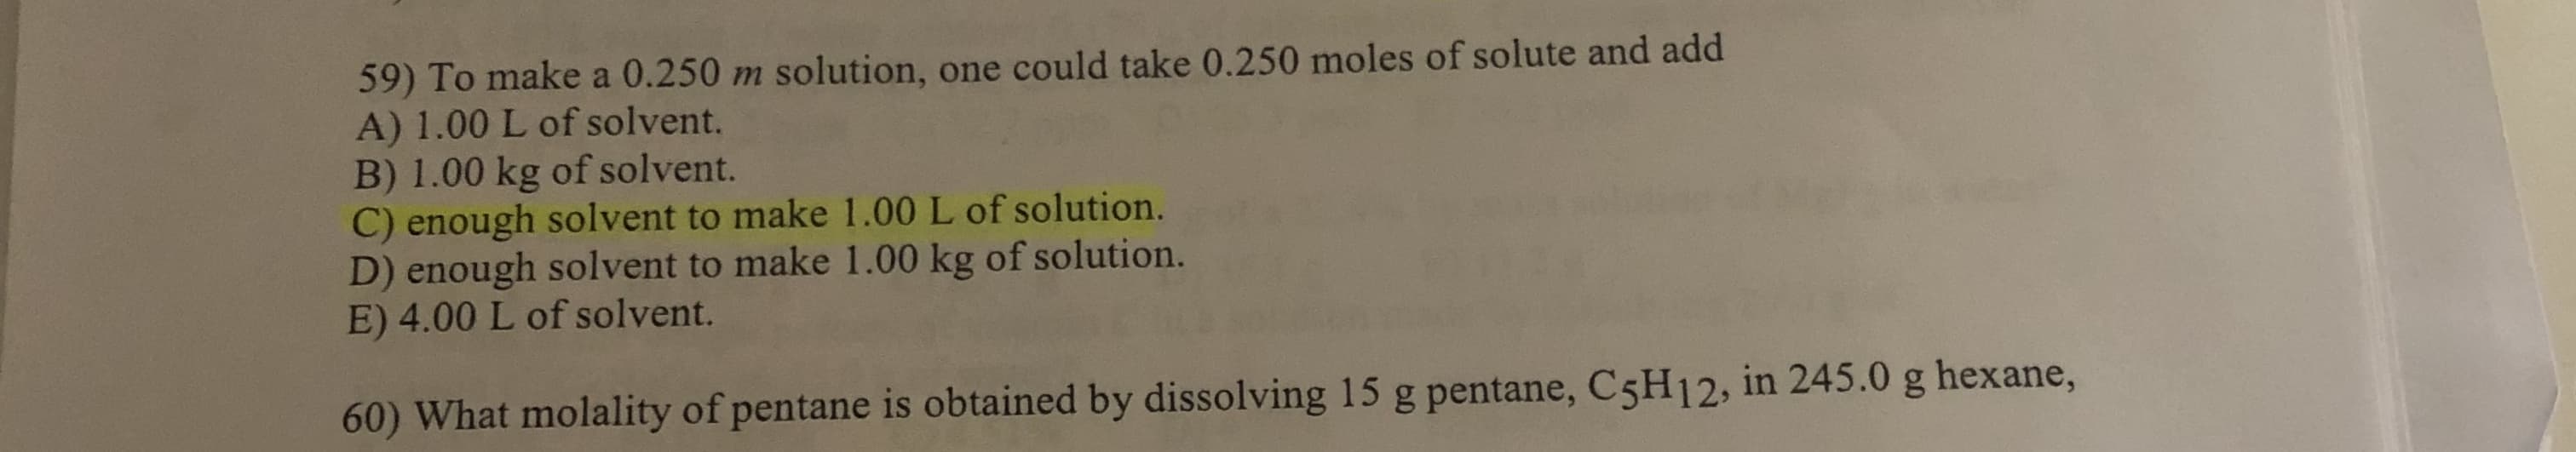 59) To make a 0.250 m solution, one could take 0.250 moles of solute and add
A) 1.00 L of solvent.
B) 1.00 kg of solvent.
C) enough solvent to make 1.00 L of solution.
D) enough solvent to make 1.00 kg of solution.
E) 4.00 L of solvent.
60) What molality of pentane is obtained by dissolving 15 g pentane, C5H12, in 245.0 g hexane,
